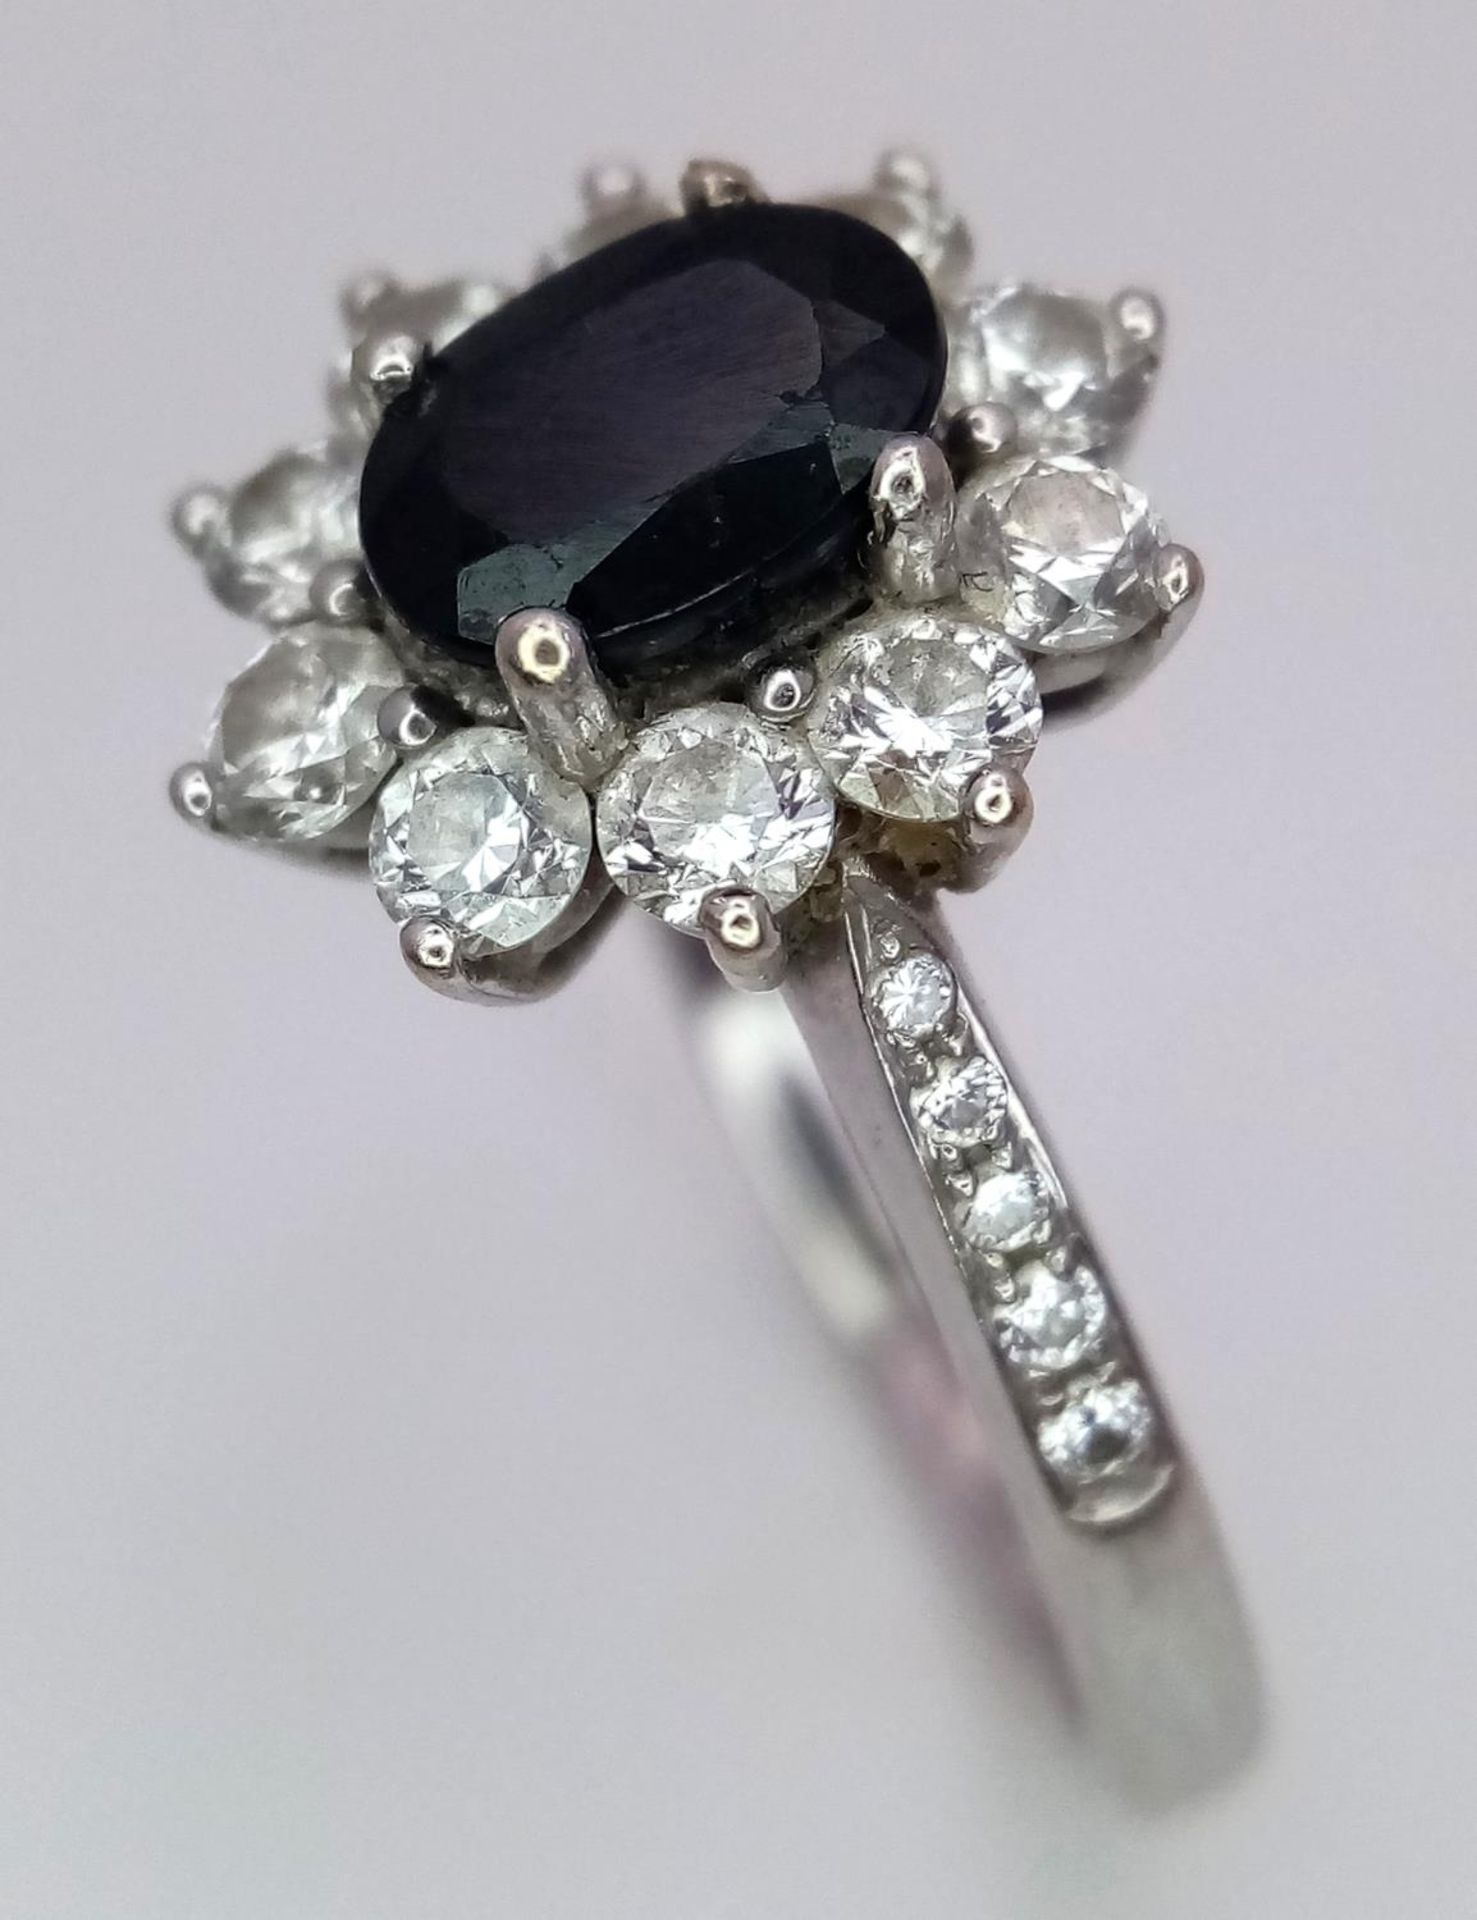 A 18K (TESTED AS) WHITE GOLD DIAMOND & SAPPHIRE CLUSTER RING 0.50CT DIAMONDS & 1CT OVAL SAPPHIRE 4. - Image 2 of 4